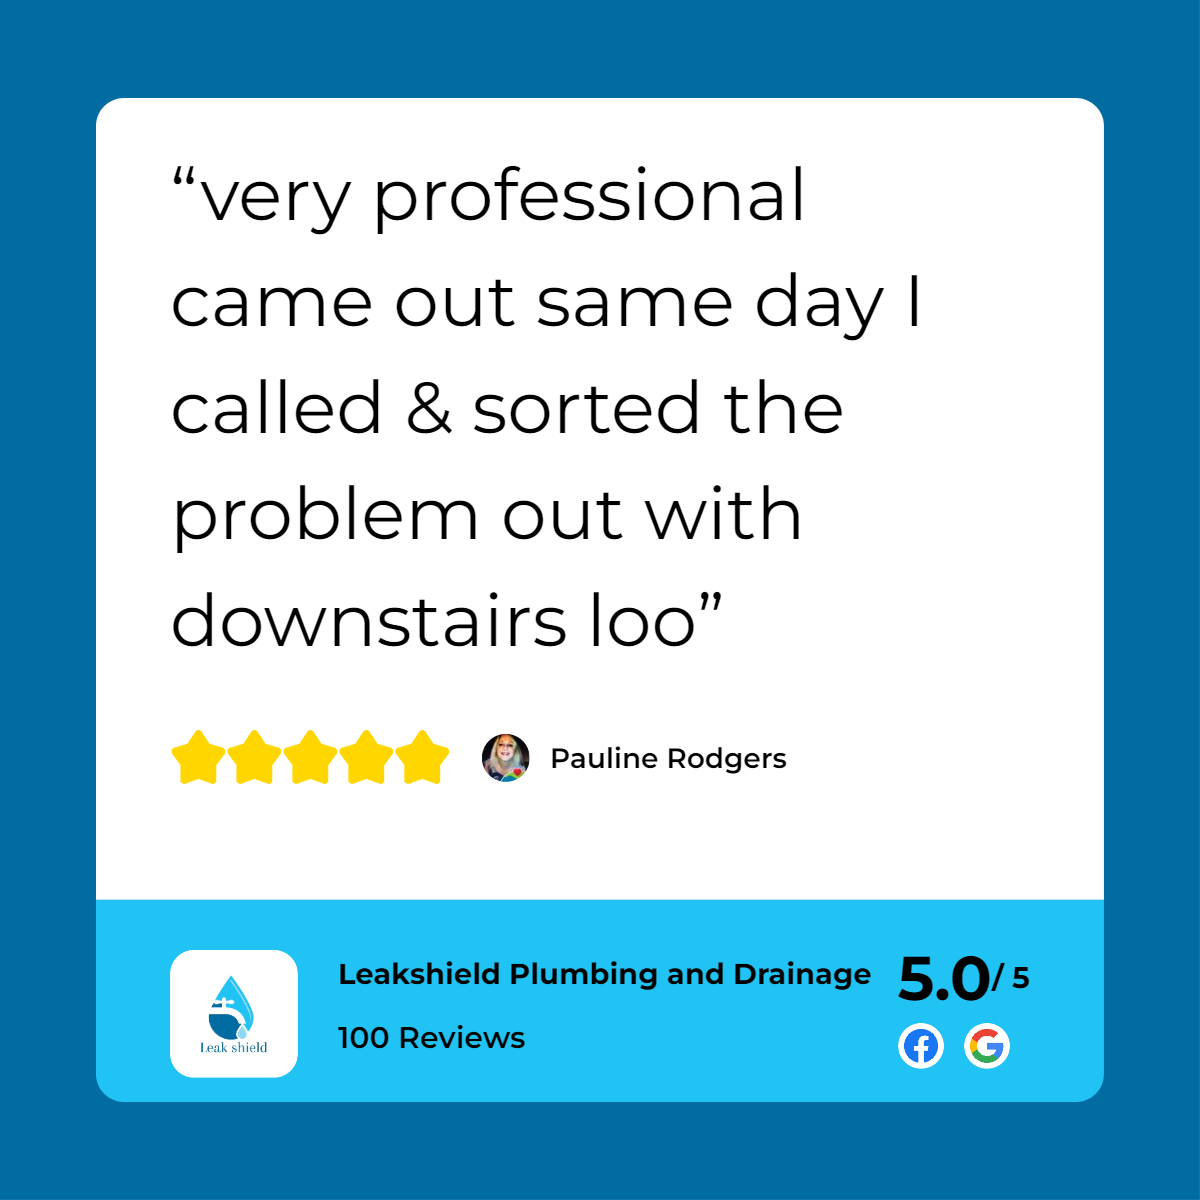 A customer review of a professional plumber who came out the same day and solved the problem with the downspouts.